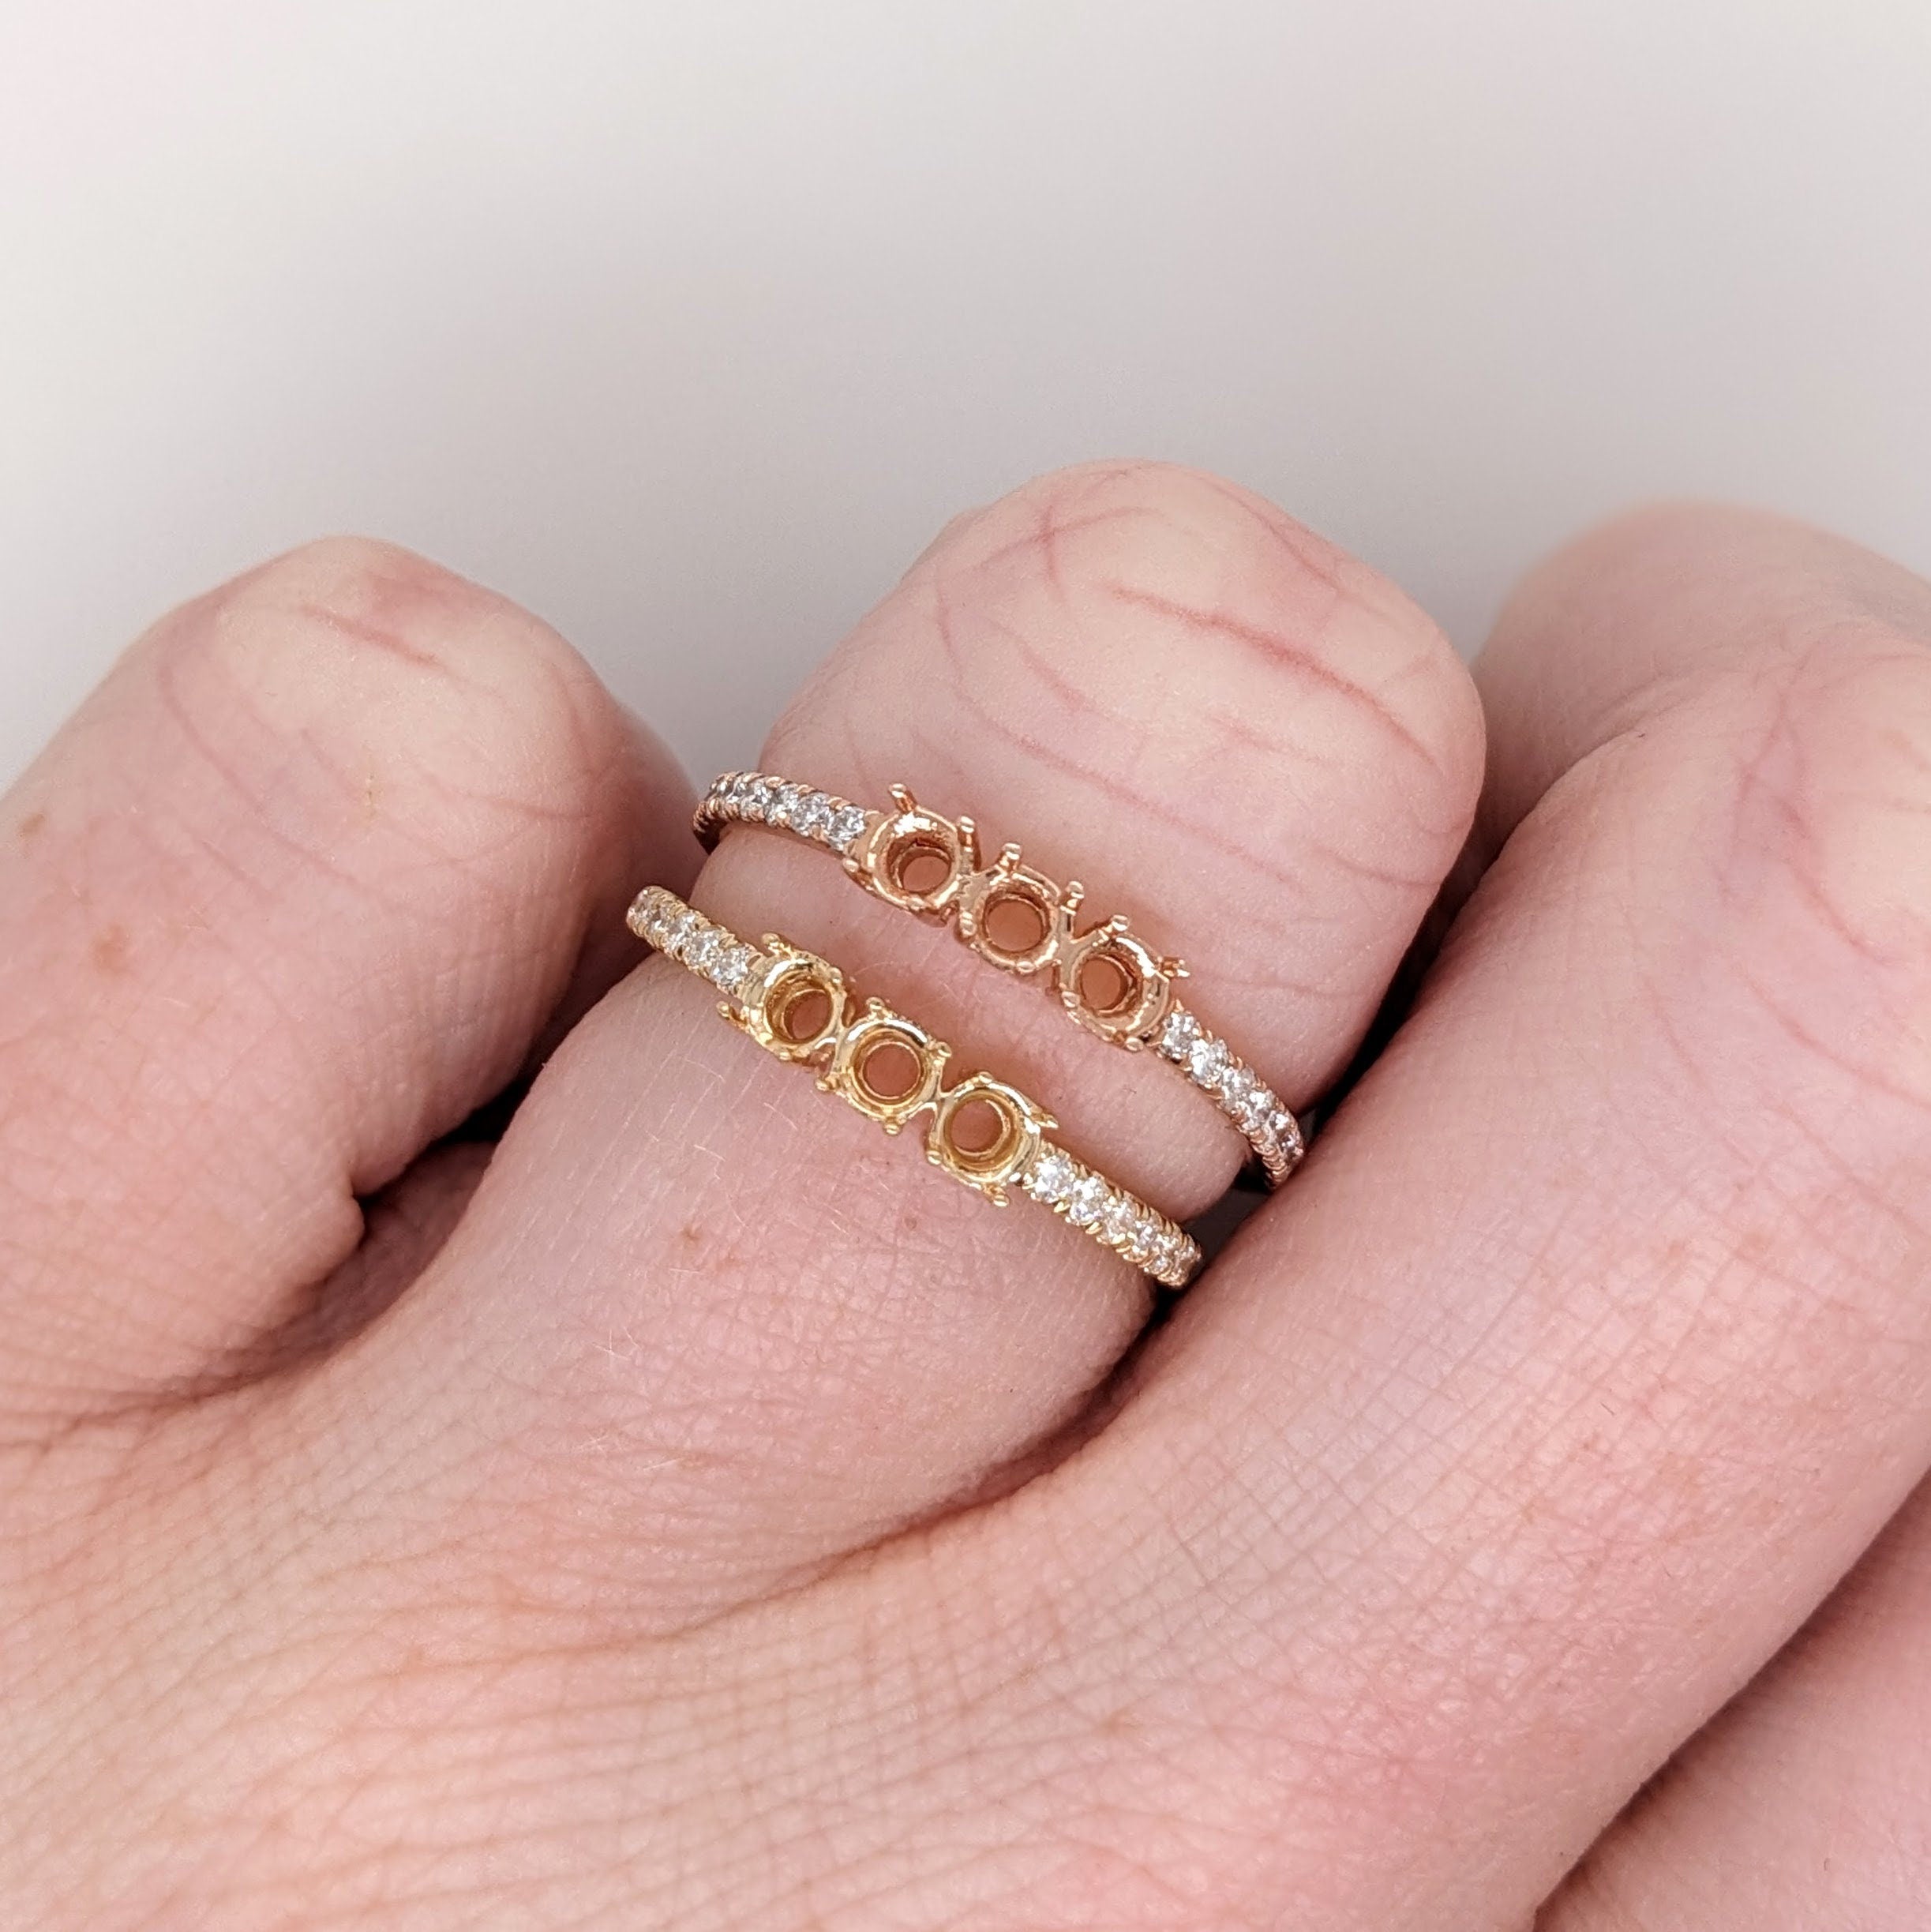 Stackable Rings-Simple East West Oval Shape Ring Semi Mount in Solid 14K or 18K White, Yellow or Rose Gold | Round 3mm | Gemstone | Stone Setting - NNJGemstones